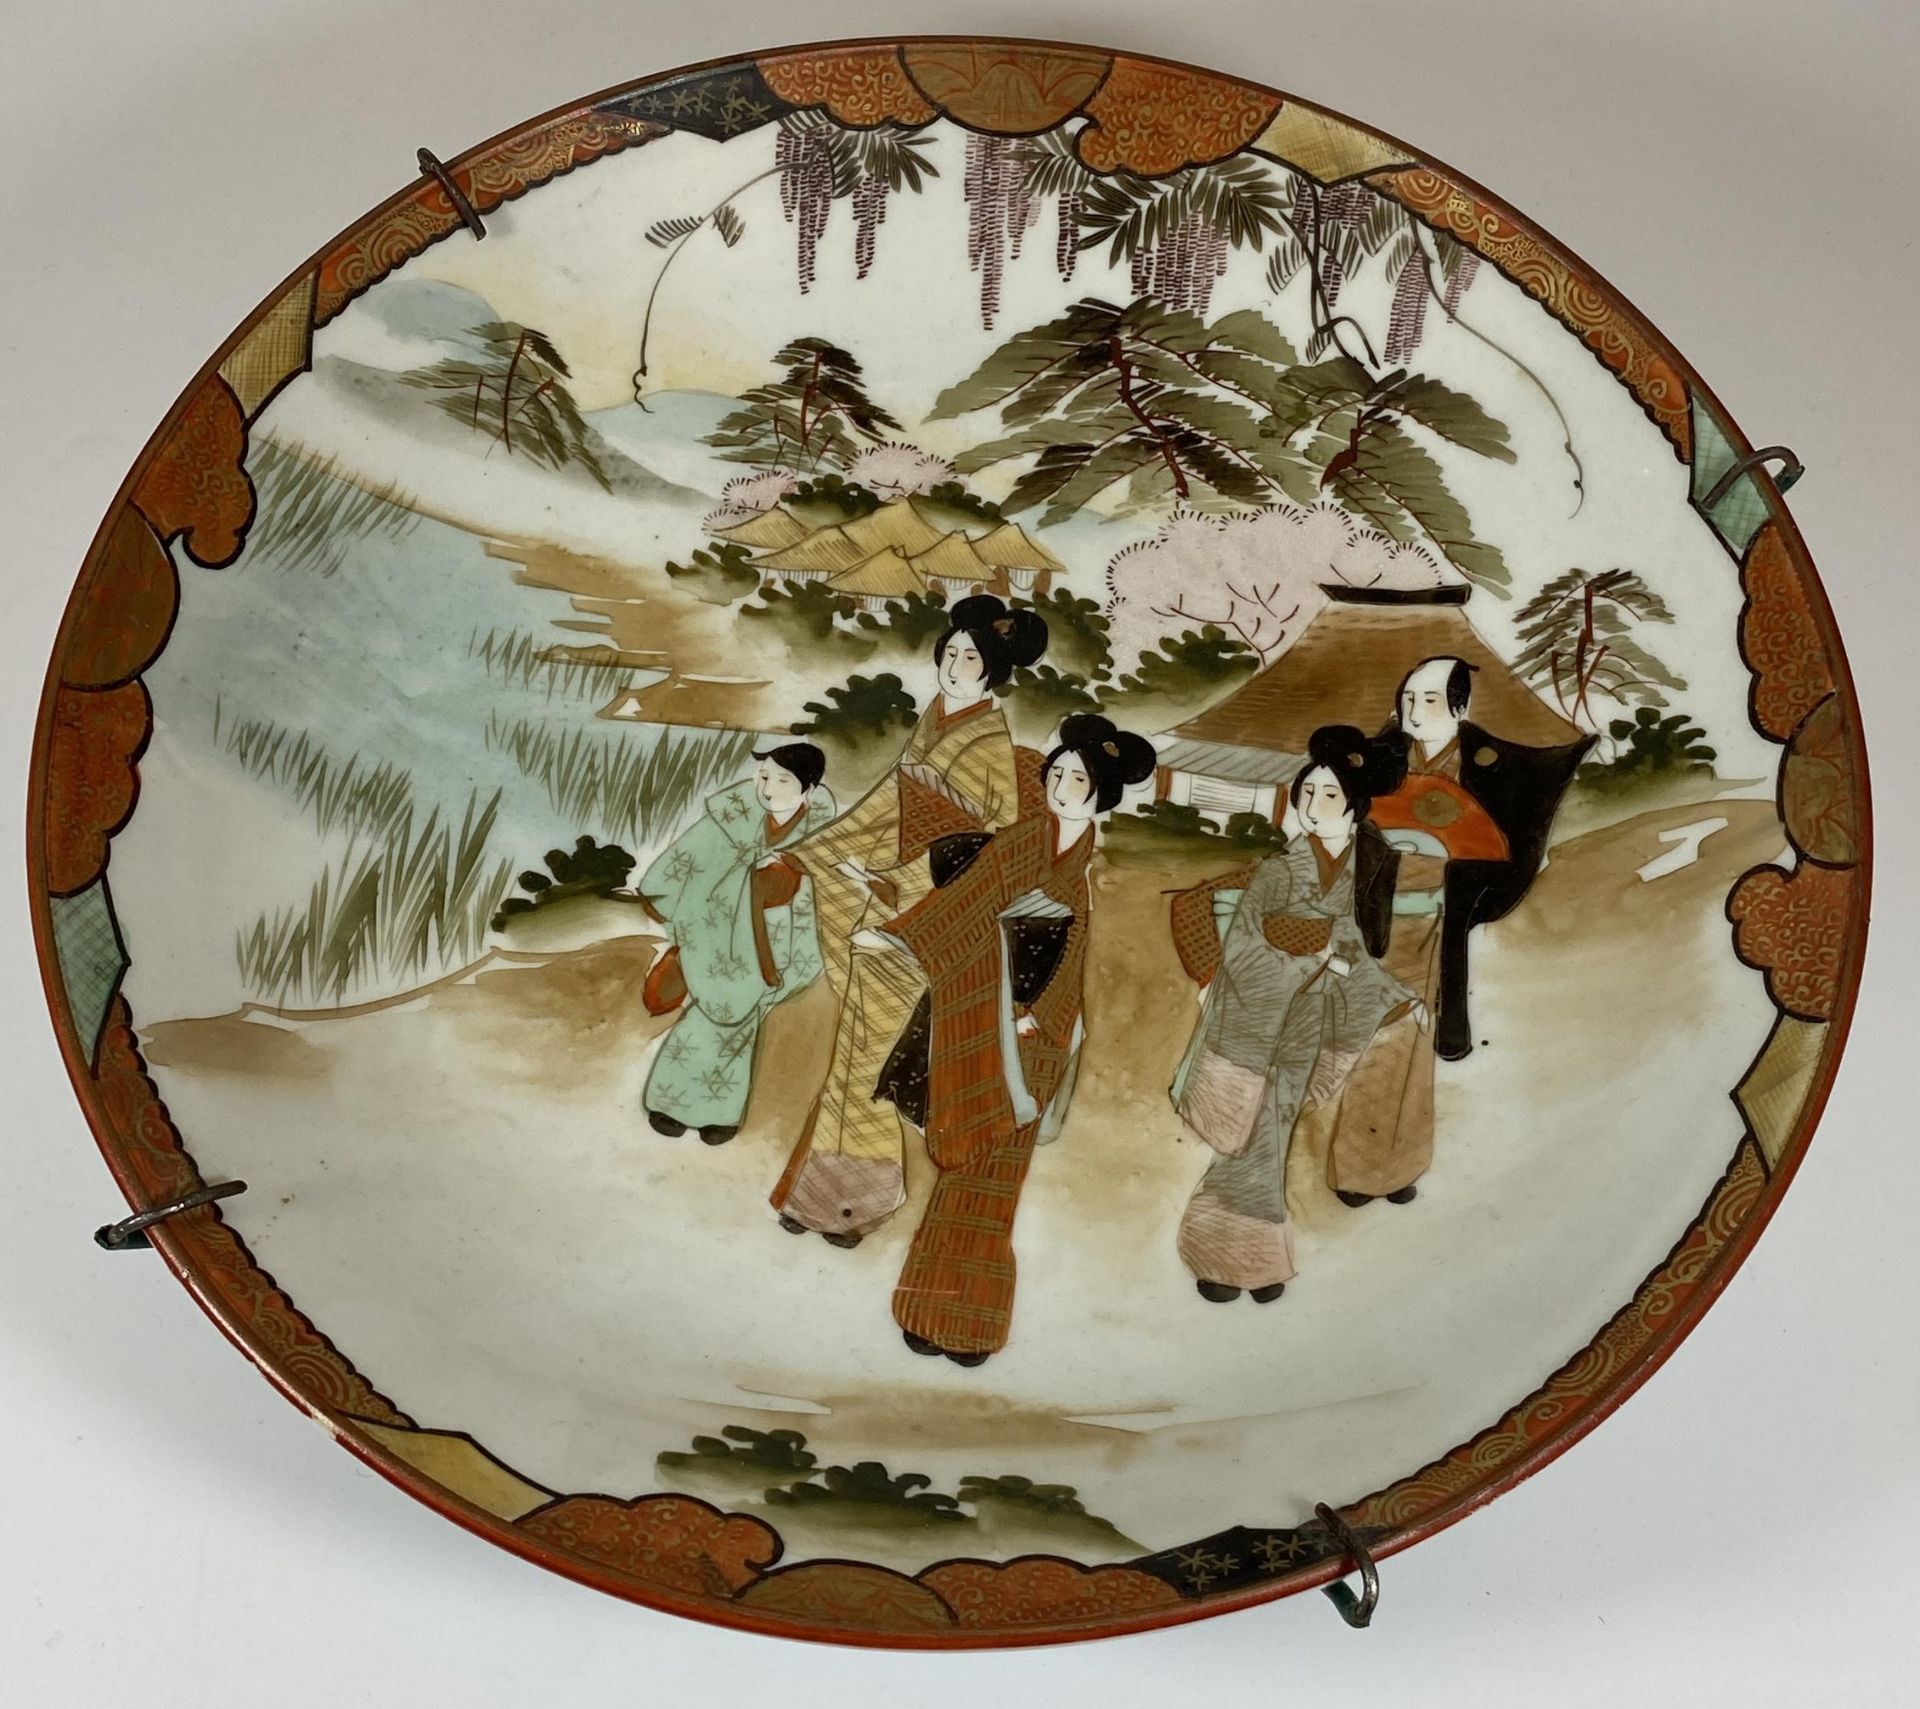 A JAPANESE MEIJI PERIOD (1868-1912) KUTANI CHARGER WITH FIGURAL DESIGN, DIAMETER 30CM